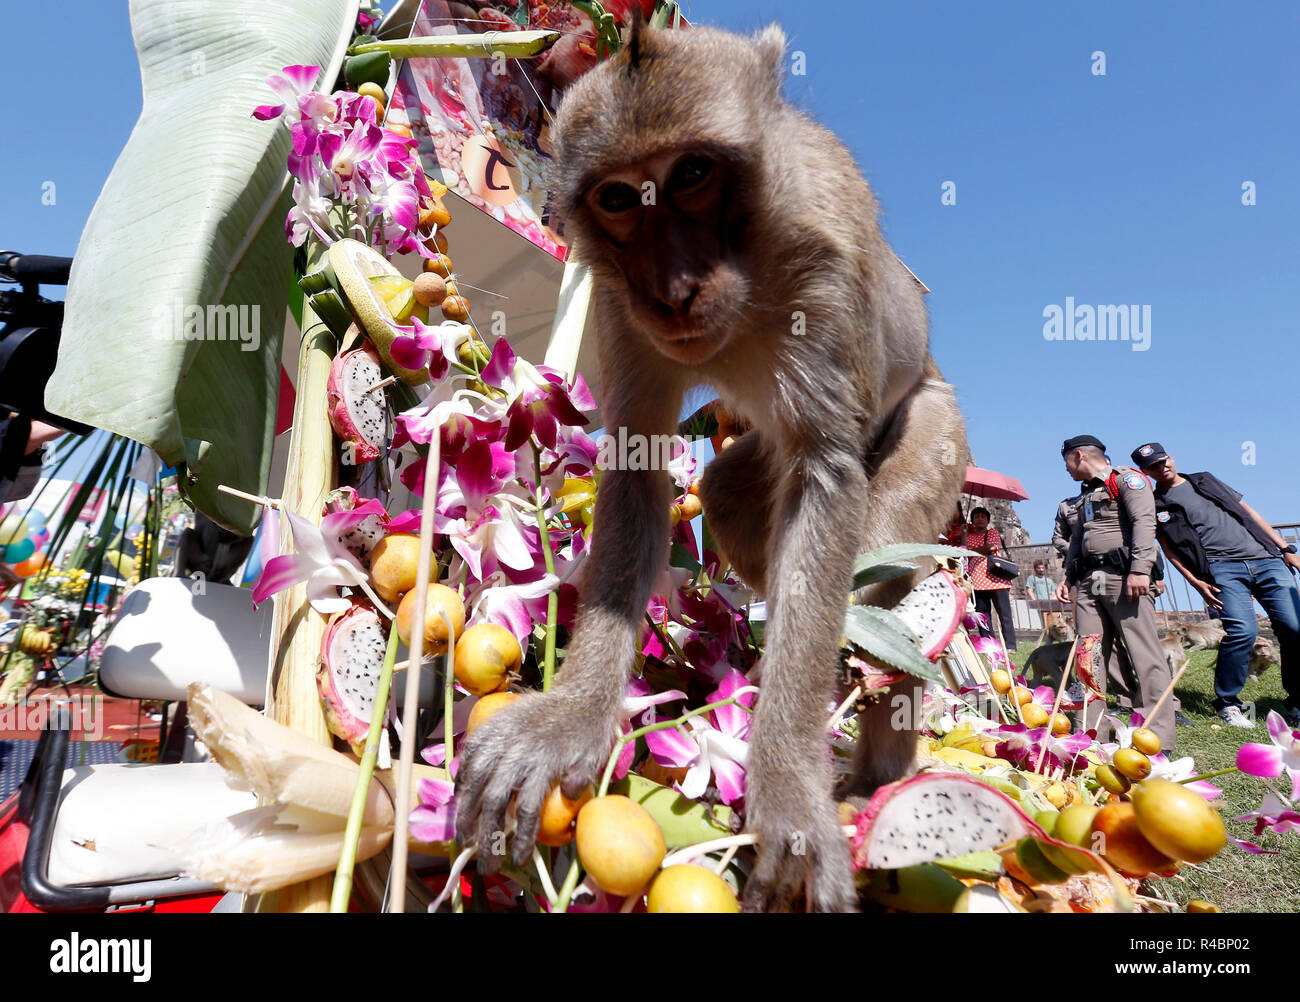 Lopburi, Thailand. 25th Nov, 2018. Monkeys eat fruits and vegetables during  the annual Monkey Buffet Festival at the Phra Prang Sam Yot temple in  Lopburi province, north of Bangkok, Thailand Credit: Chaiwat